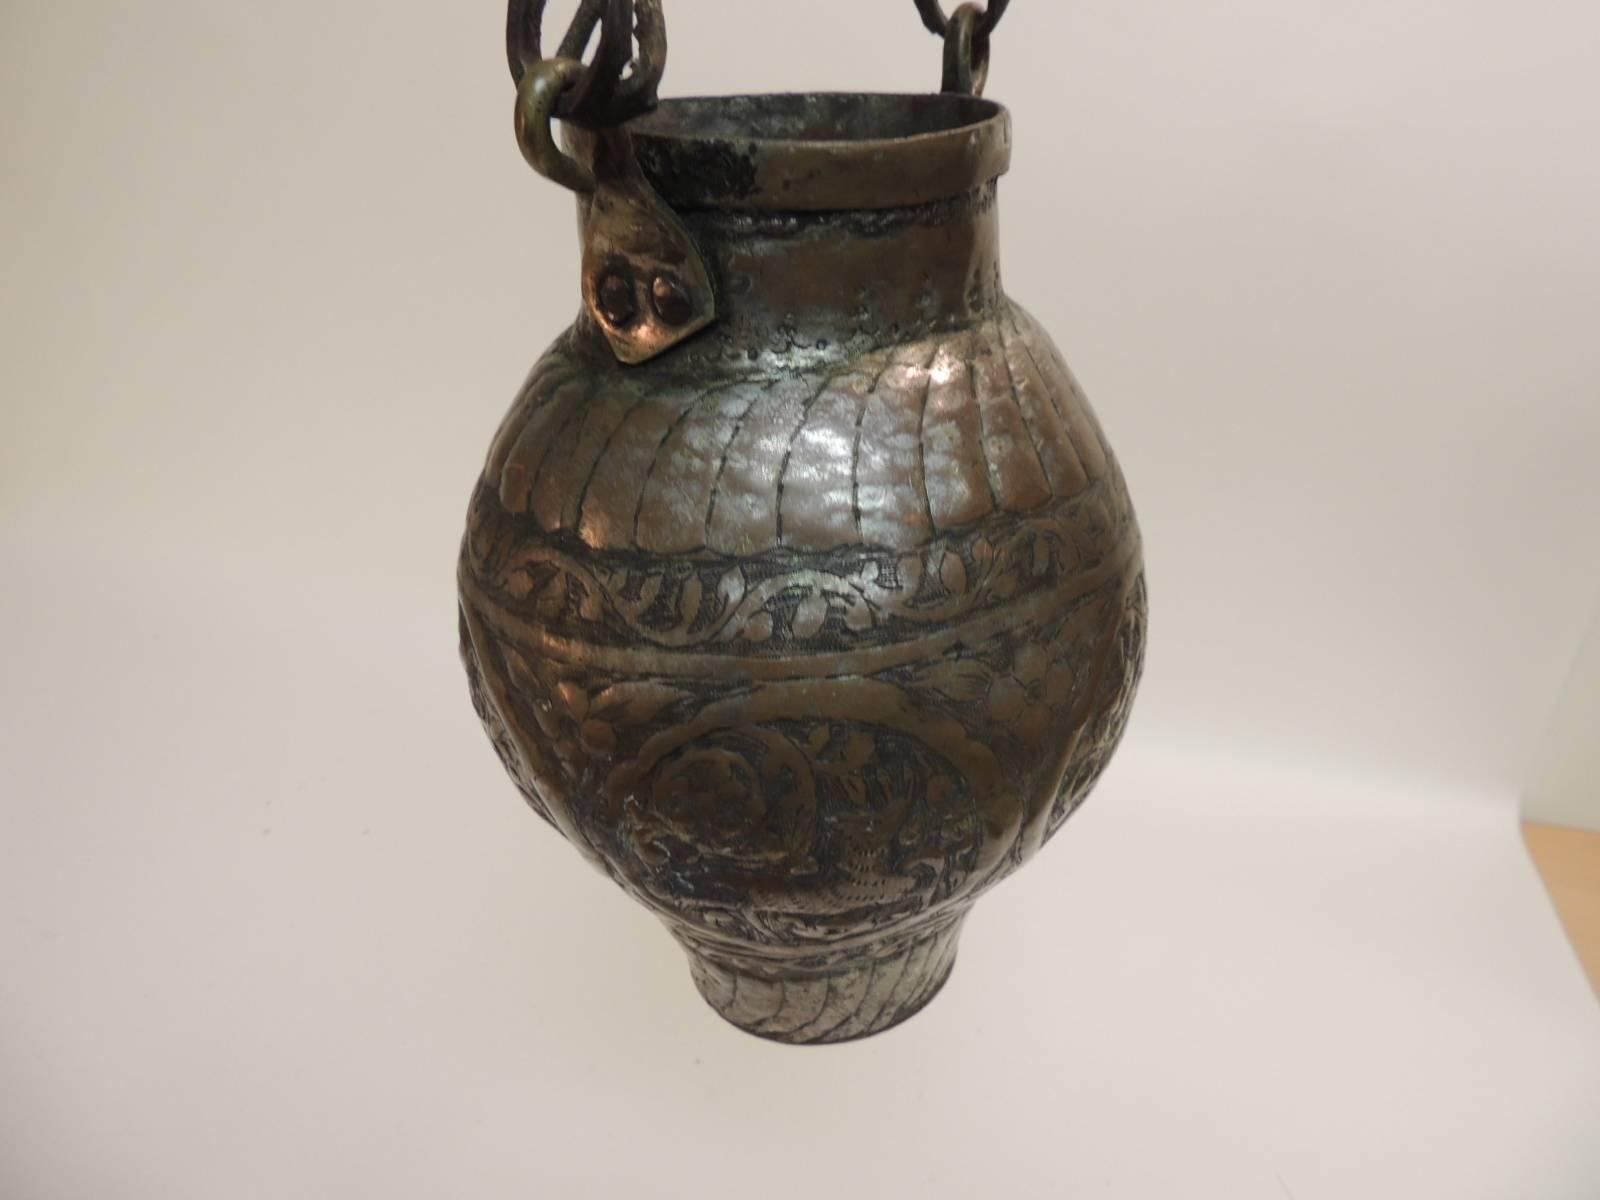 Offered by the Antique Textiles Galleries:
Antique Persian copper repousse oil lamp with hanging hook.  
Antique oil lamp designed with an intricate pattern and around three medallions that encircle the body of the vessel. The medallions depict a